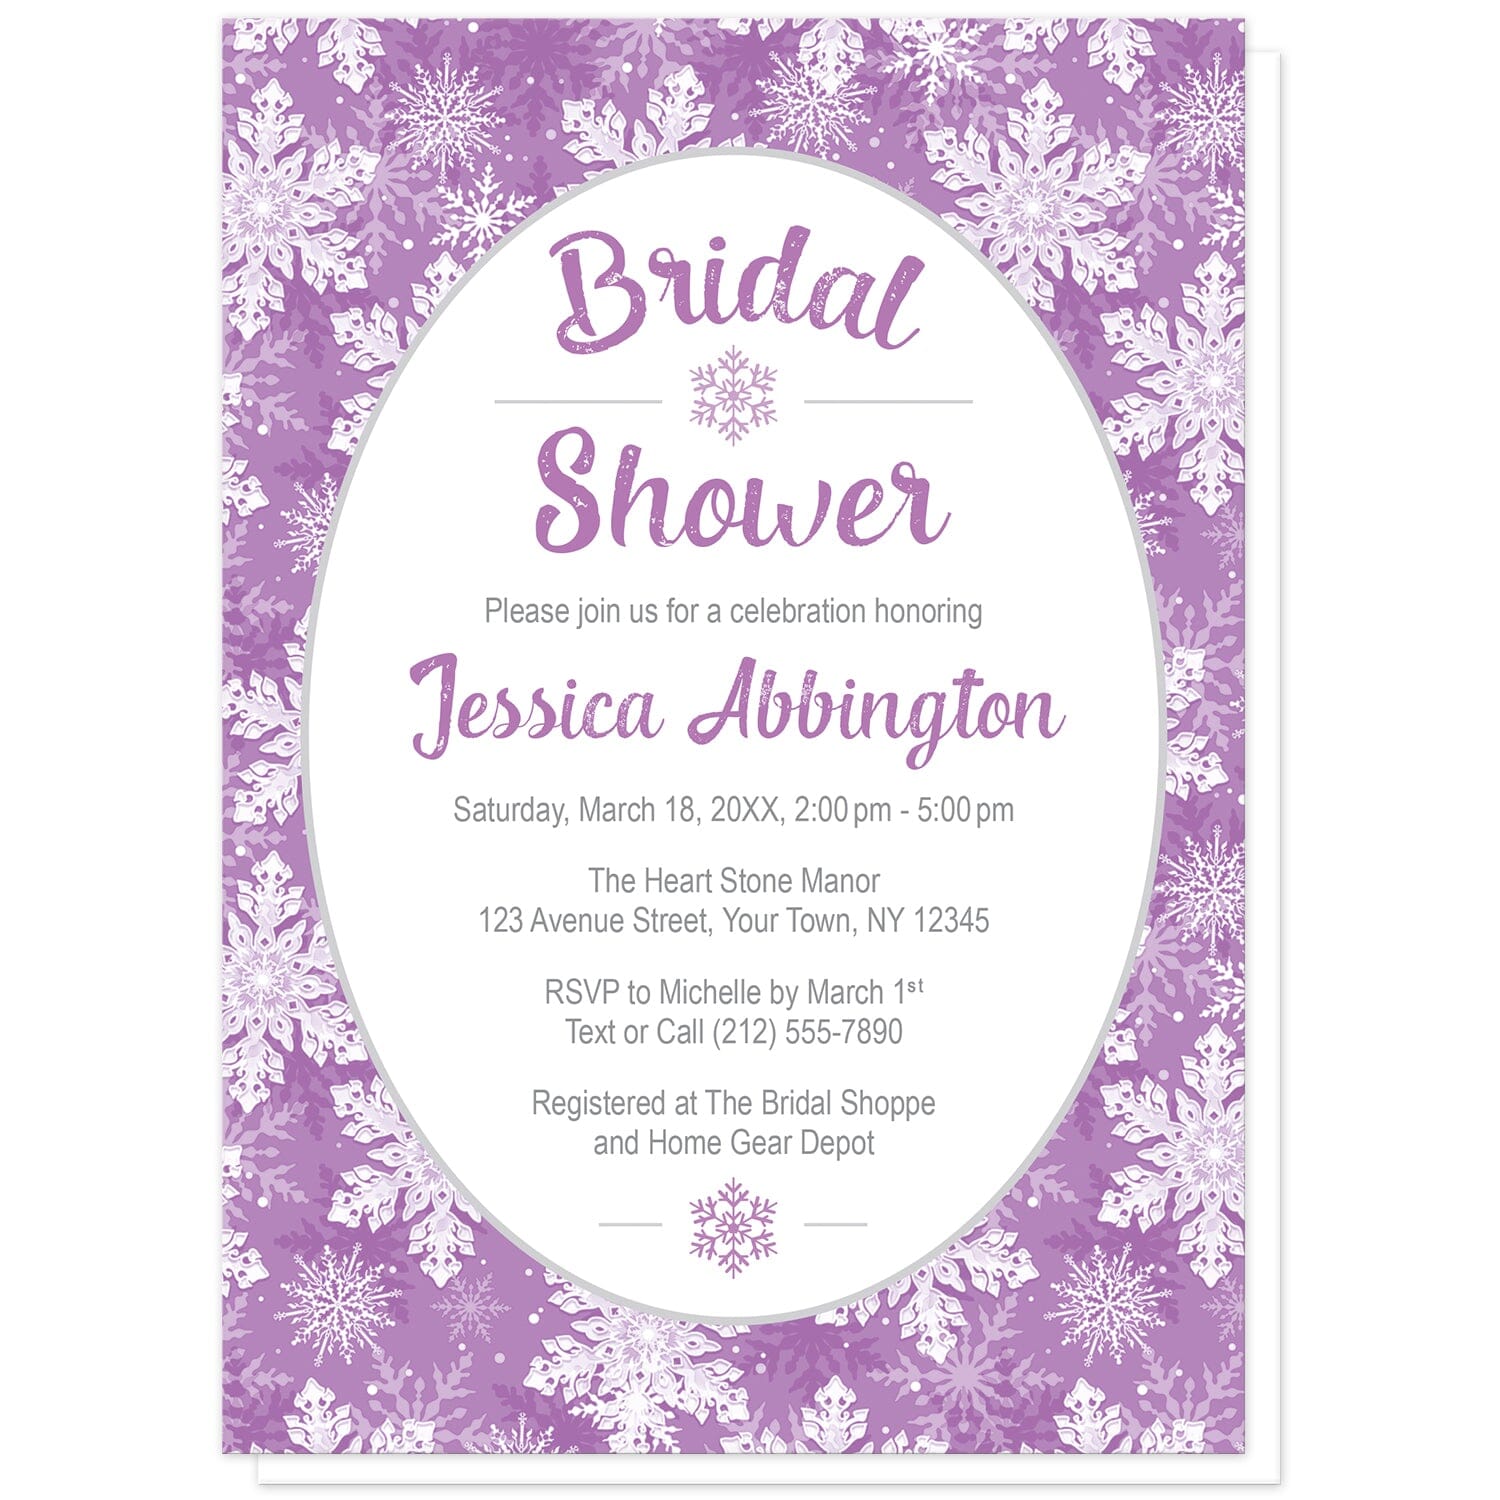 Purple Snowflake Bridal Shower Invitations at Artistically Invited. Beautifully ornate purple snowflake bridal shower invitations with your personalized bridal shower celebration details custom printed in purple and gray in a white oval frame design over a purple and white snowflake pattern background.